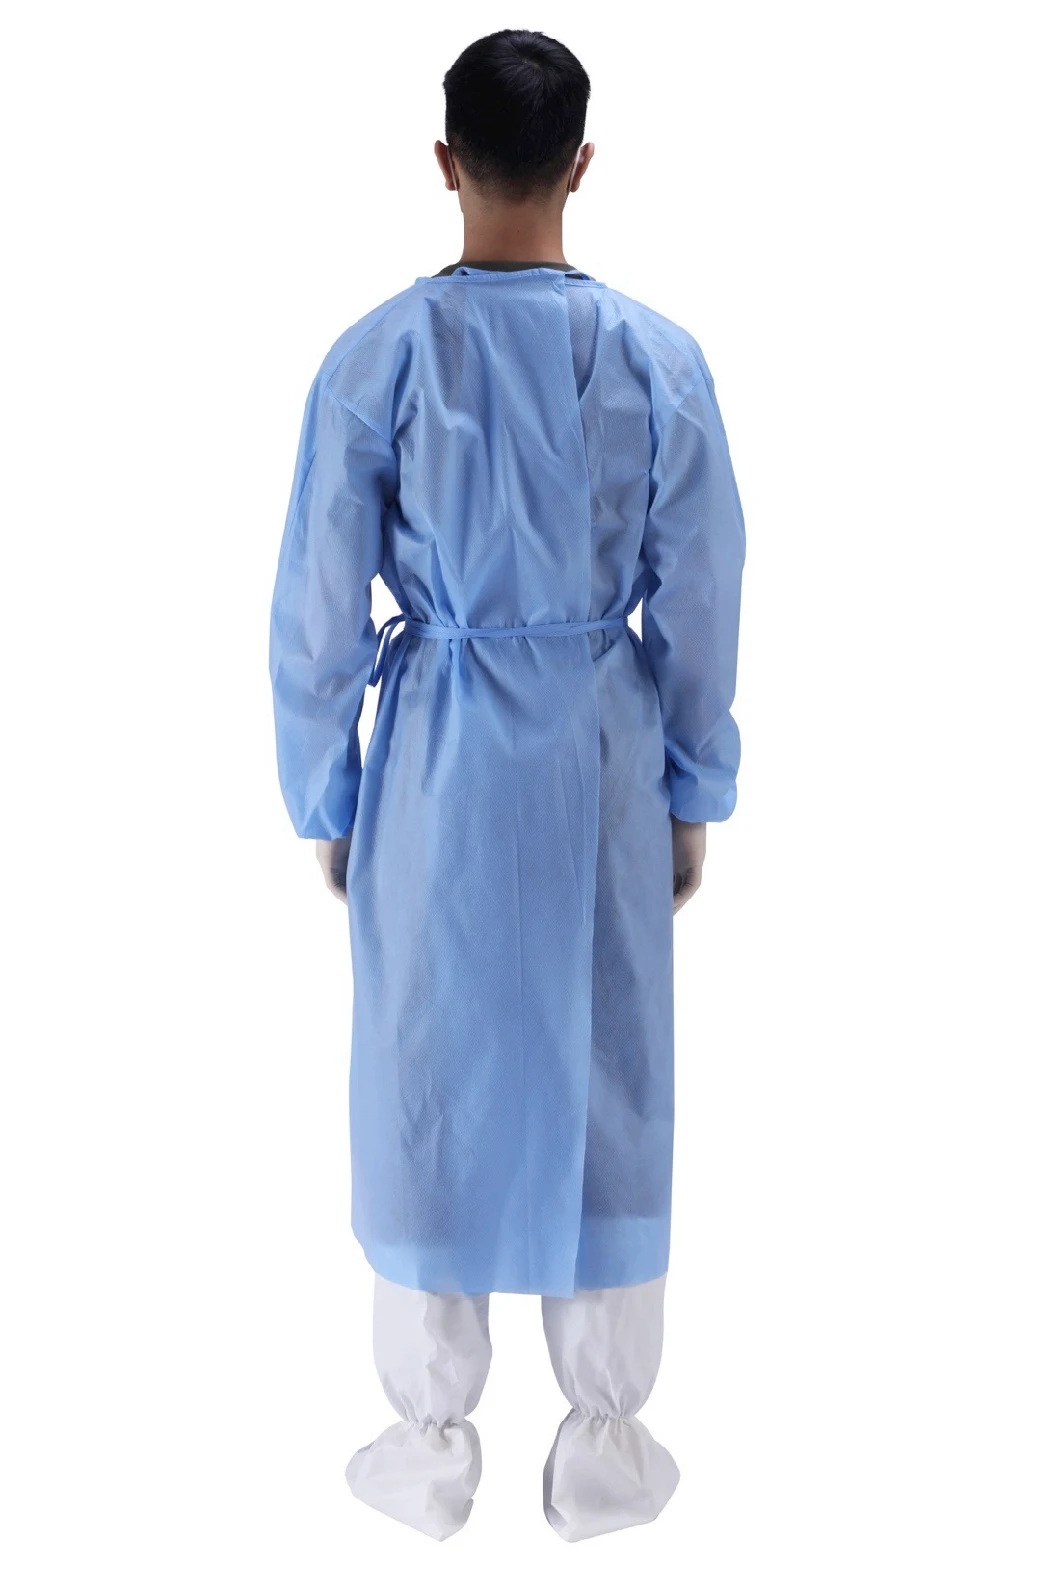 Gowns Disposable Isolation Gowns Non-Woven Isolation Gowns Protective Overalls